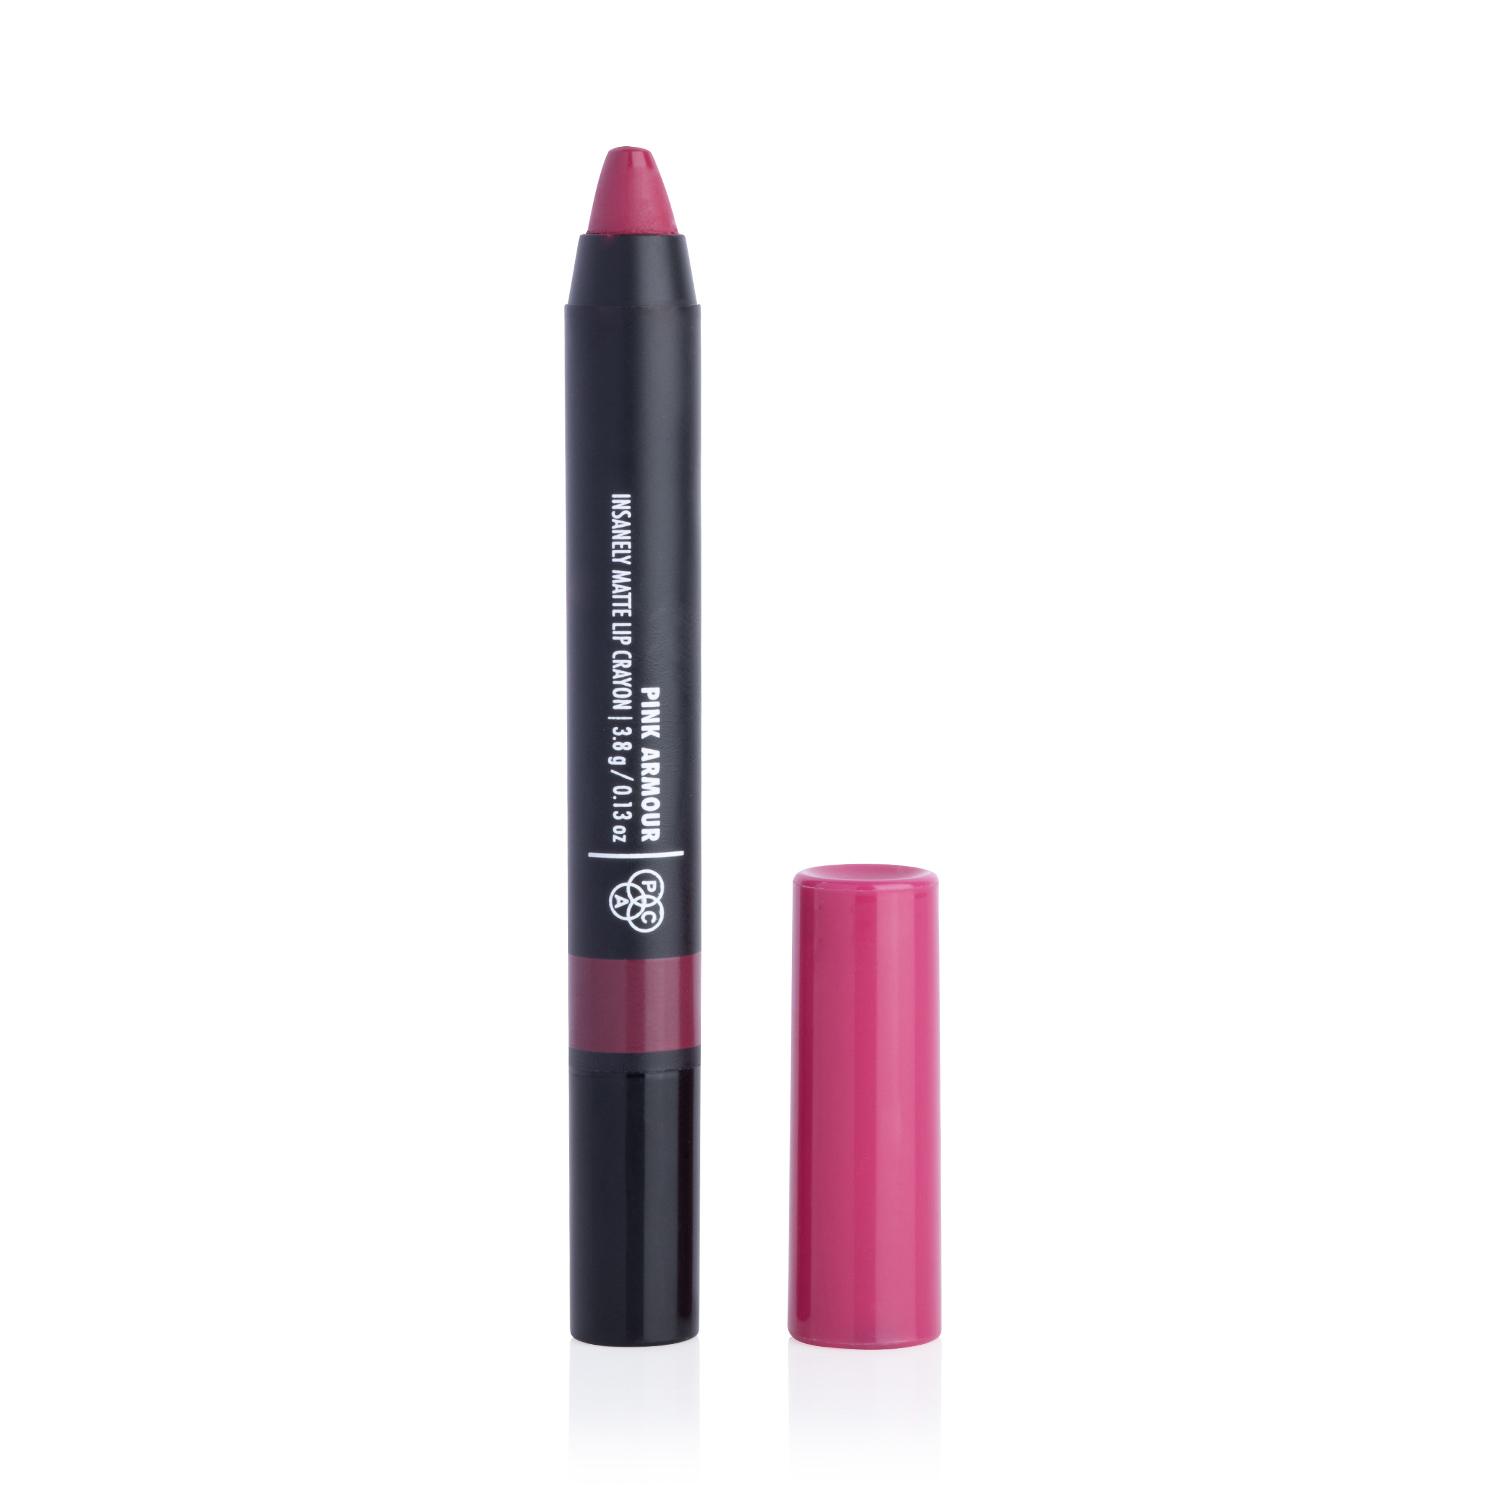 PAC | PAC Insanely Matte Lip Crayon - Pink Armour (3.8g)